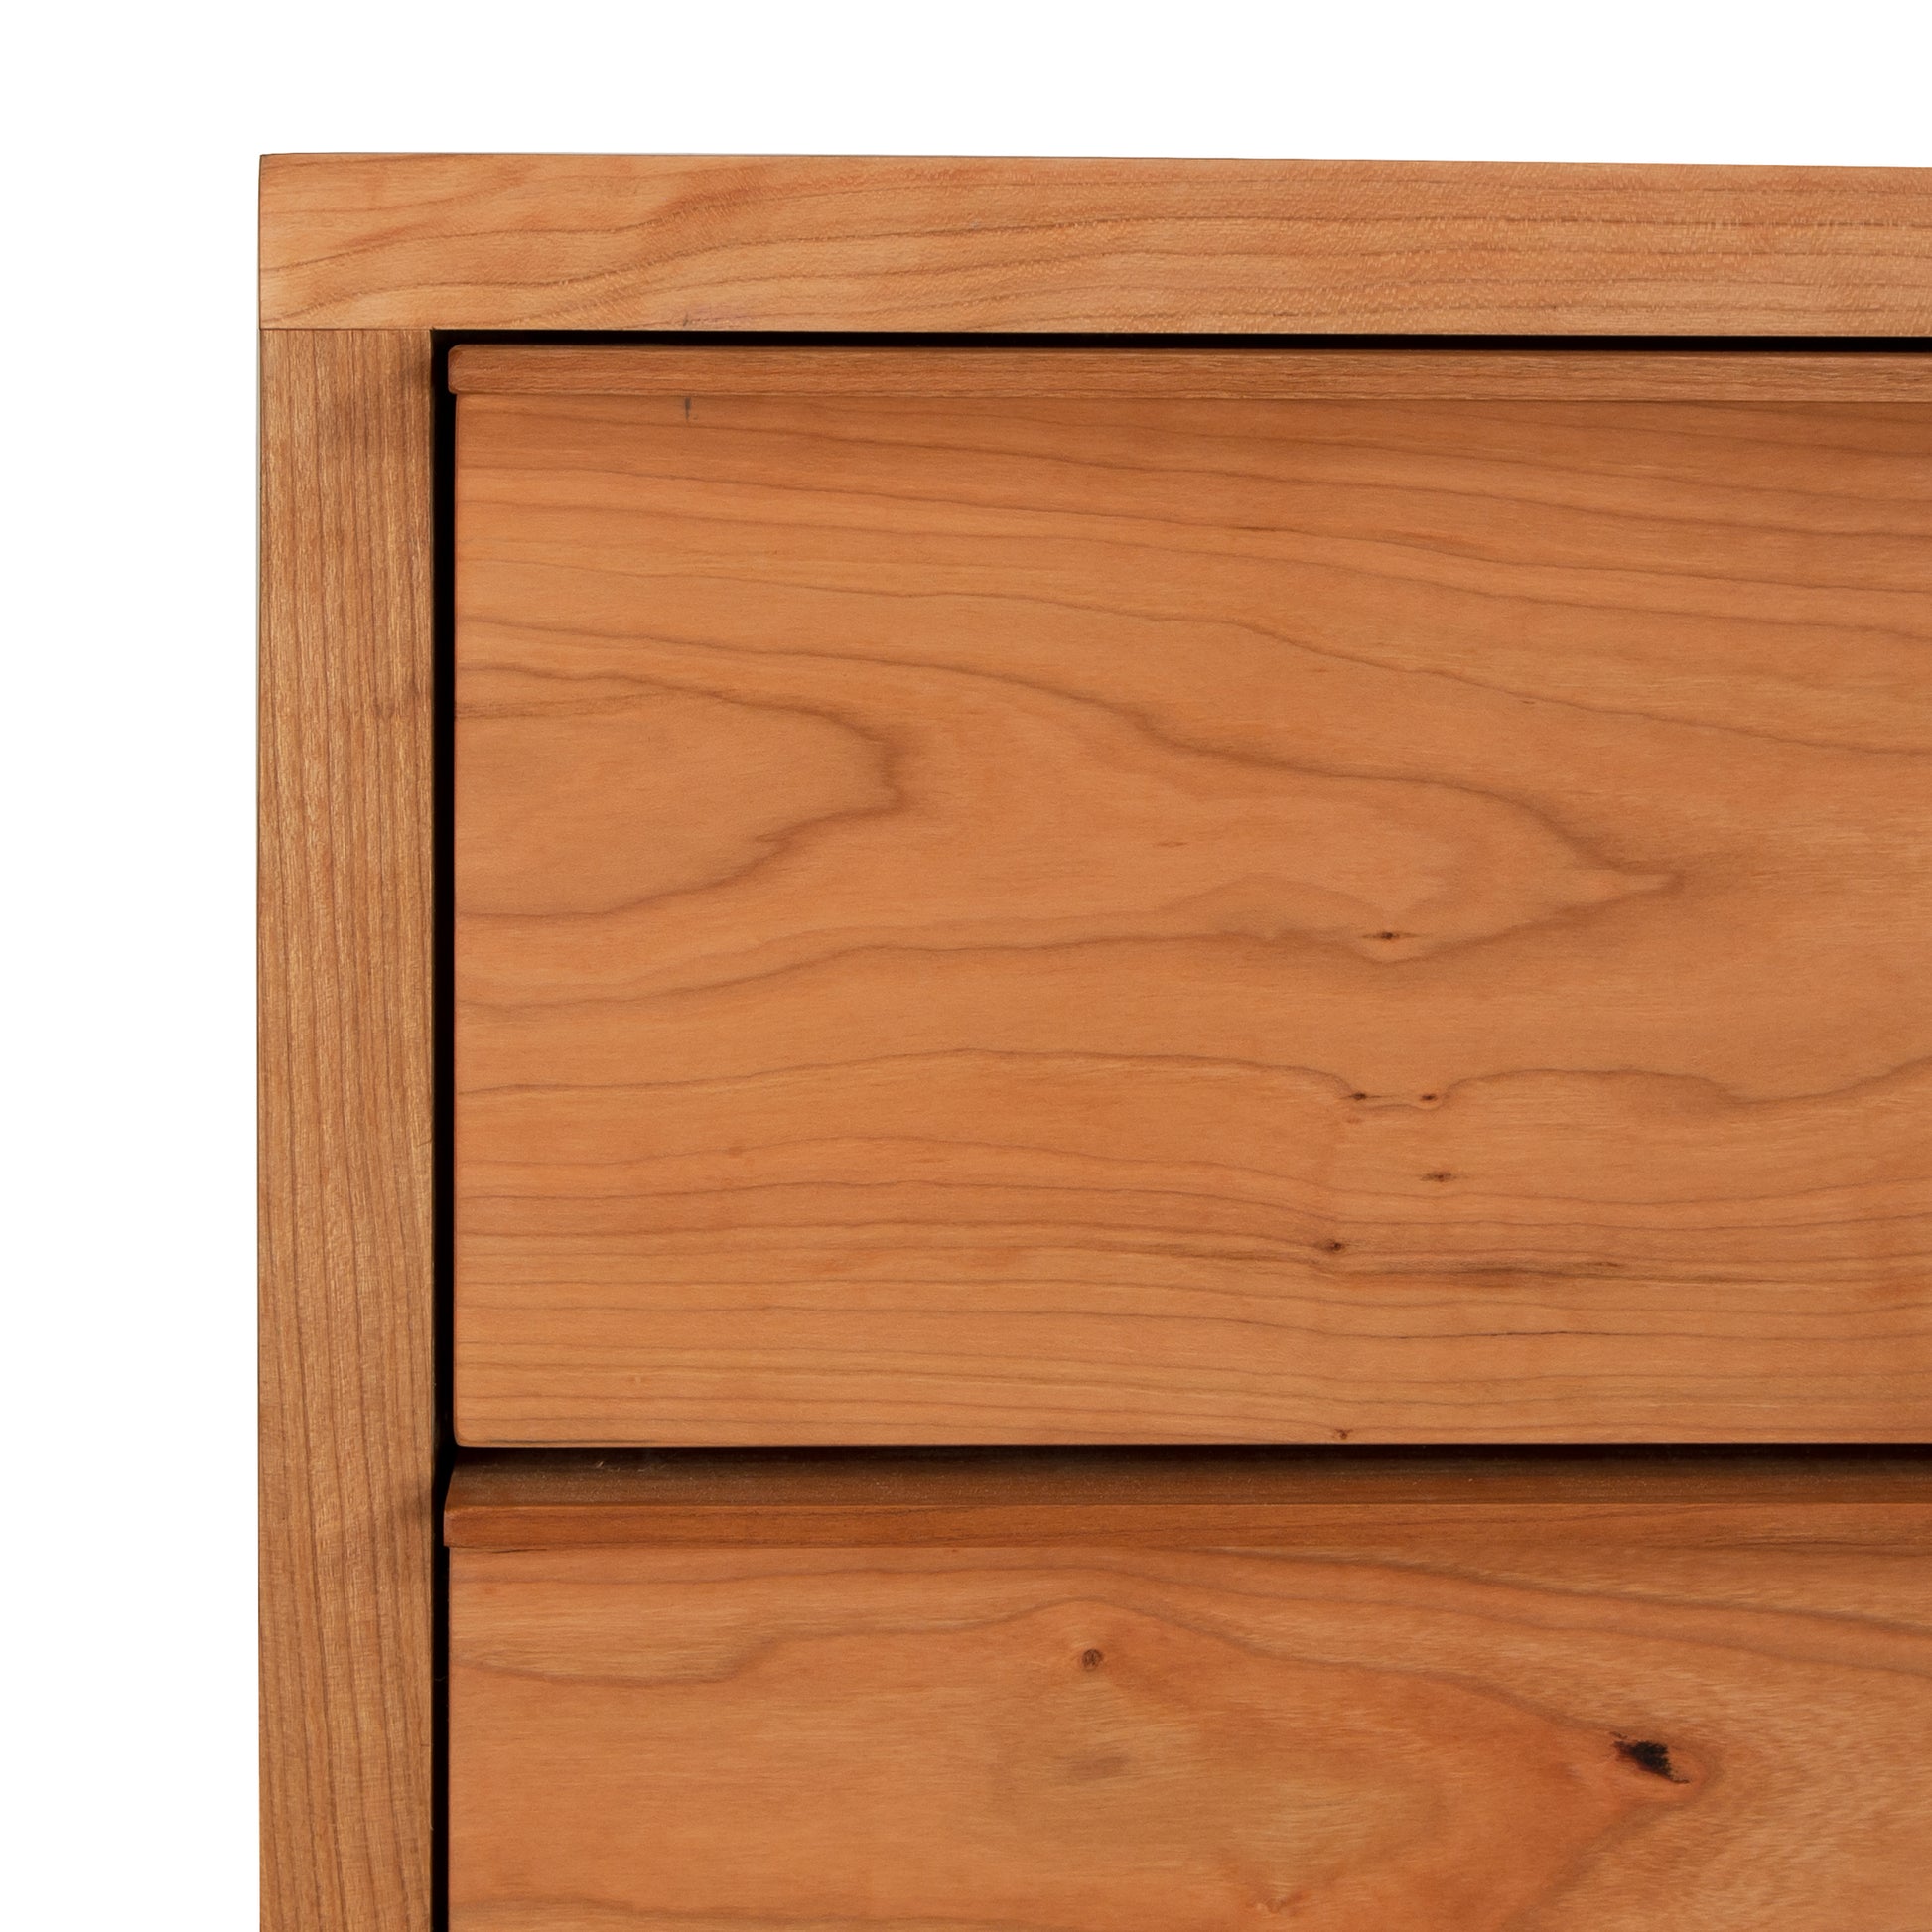 Close-up view of a wooden drawer from the Vermont Furniture Designs Kipling 5-Drawer Wide Chest, showing the grain patterns of the wood and the joint details indicative of Vermont craftsmanship.